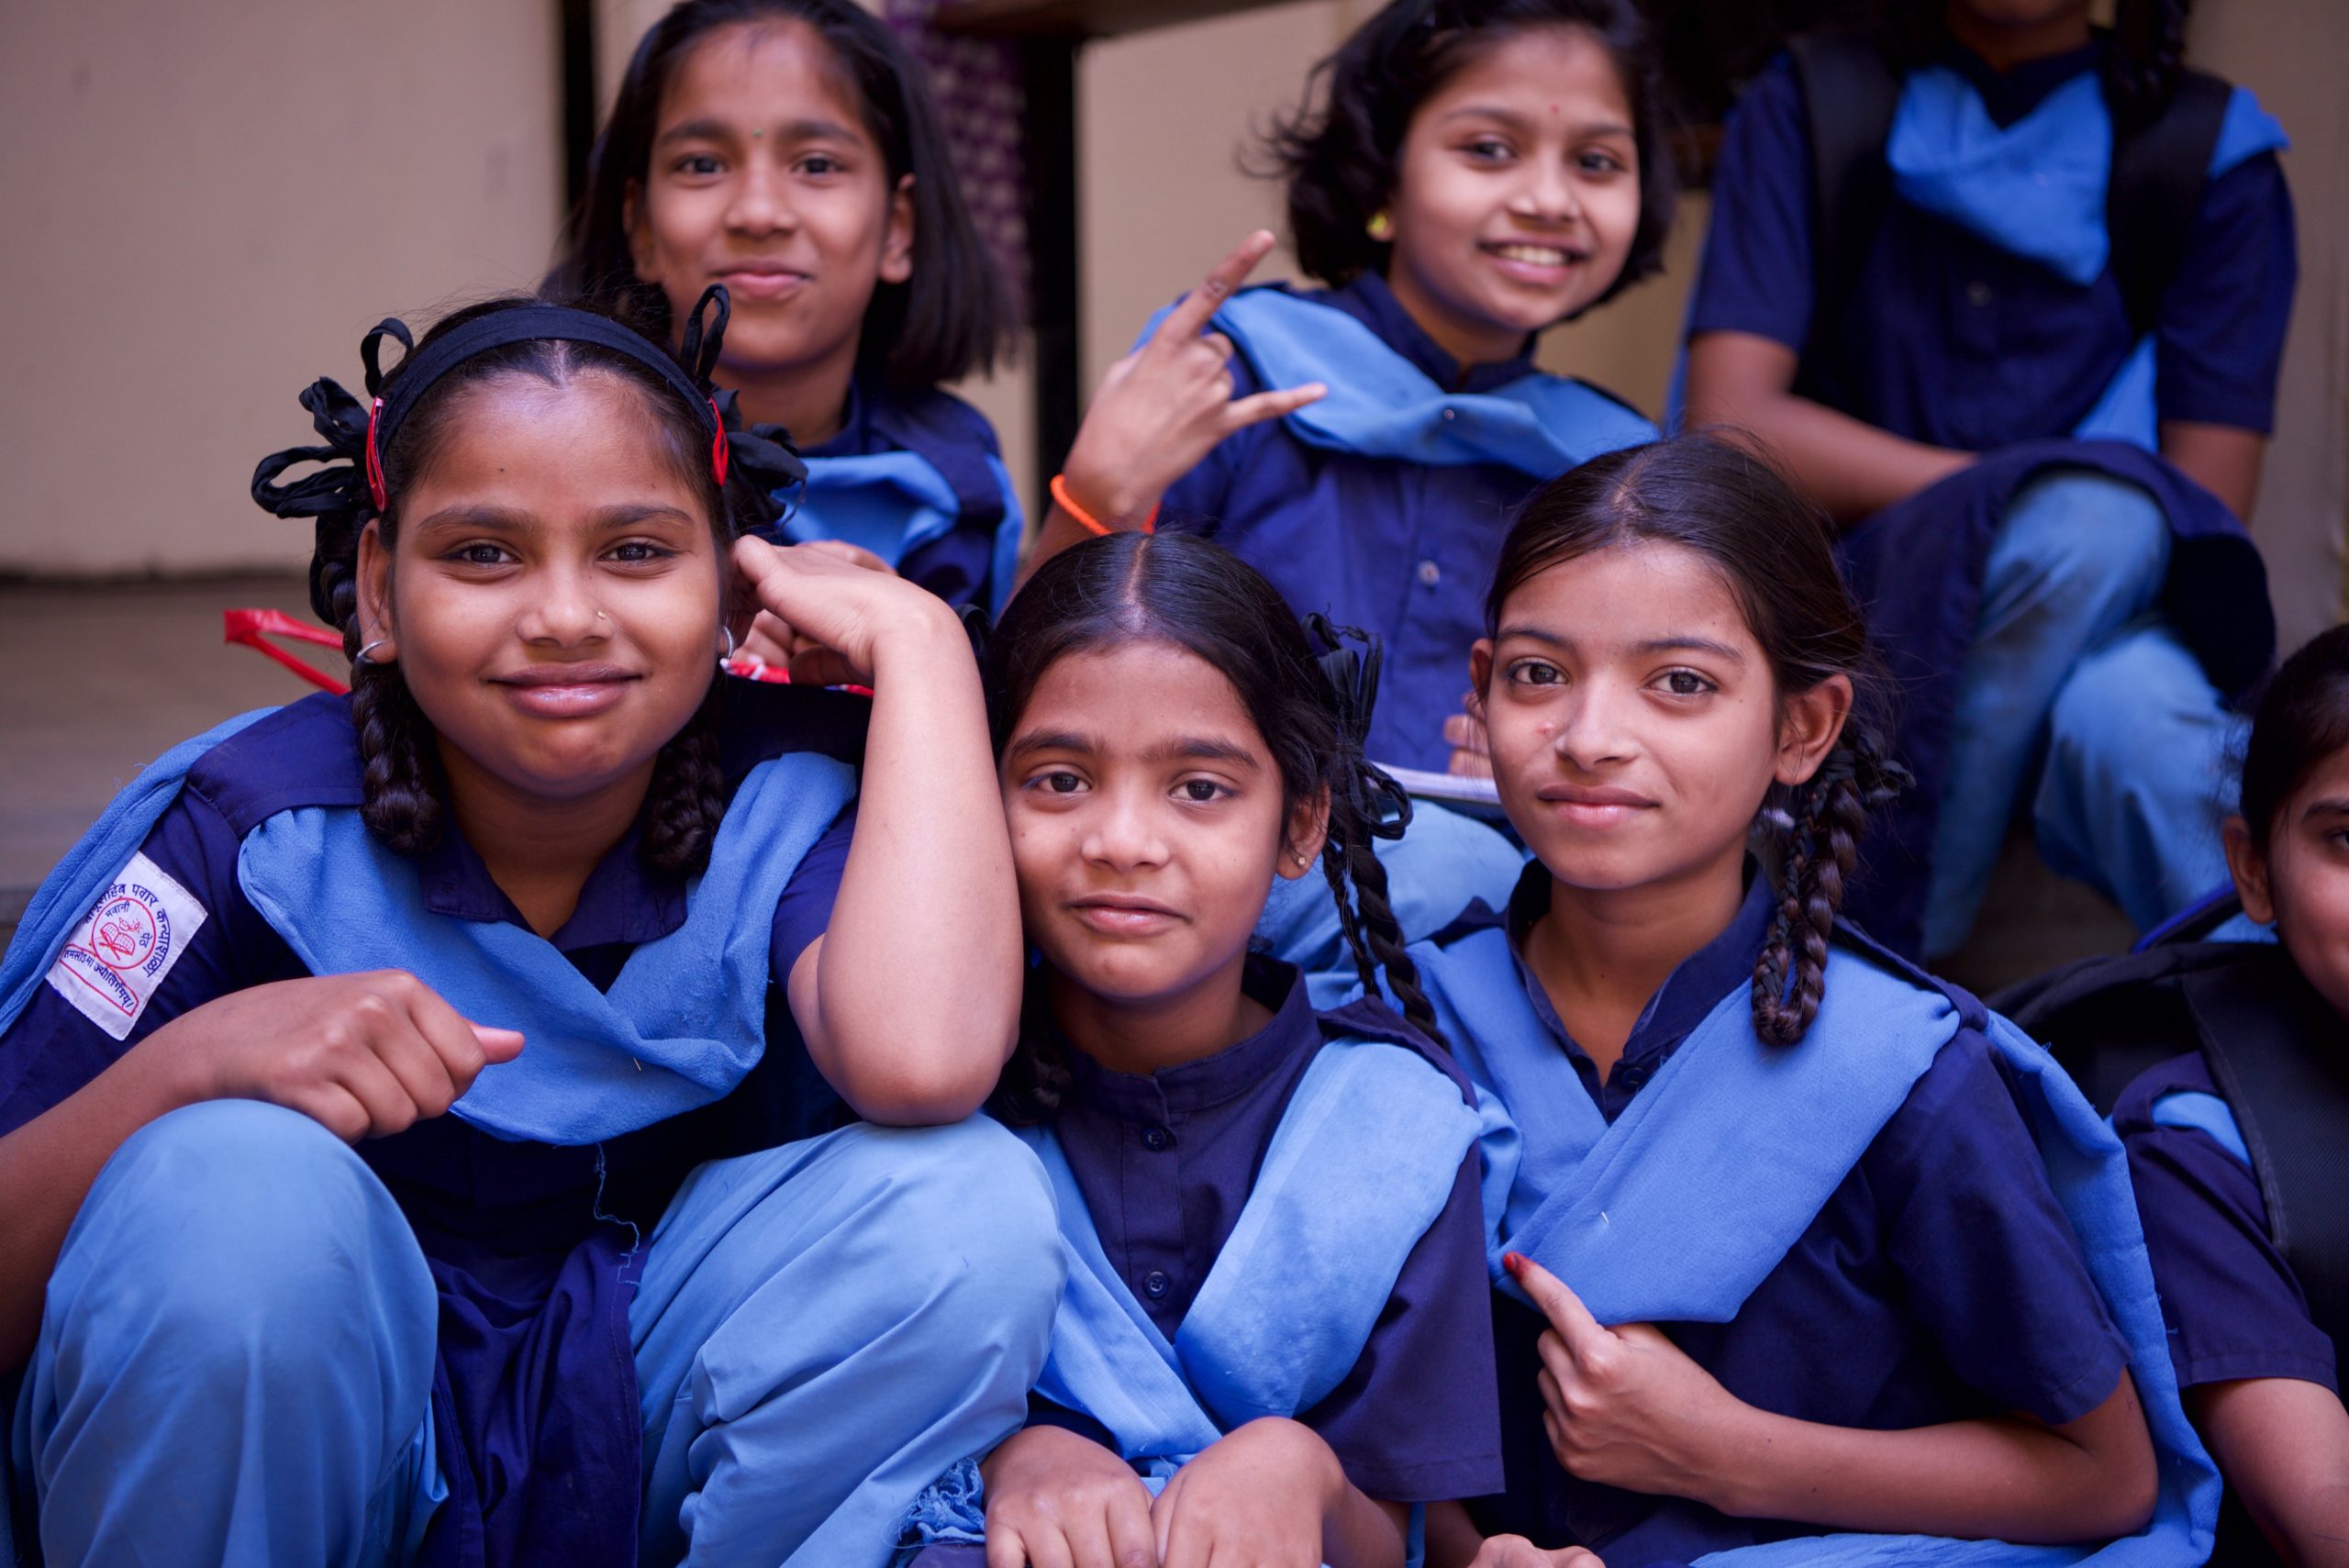 Girls in blue uniforms in India